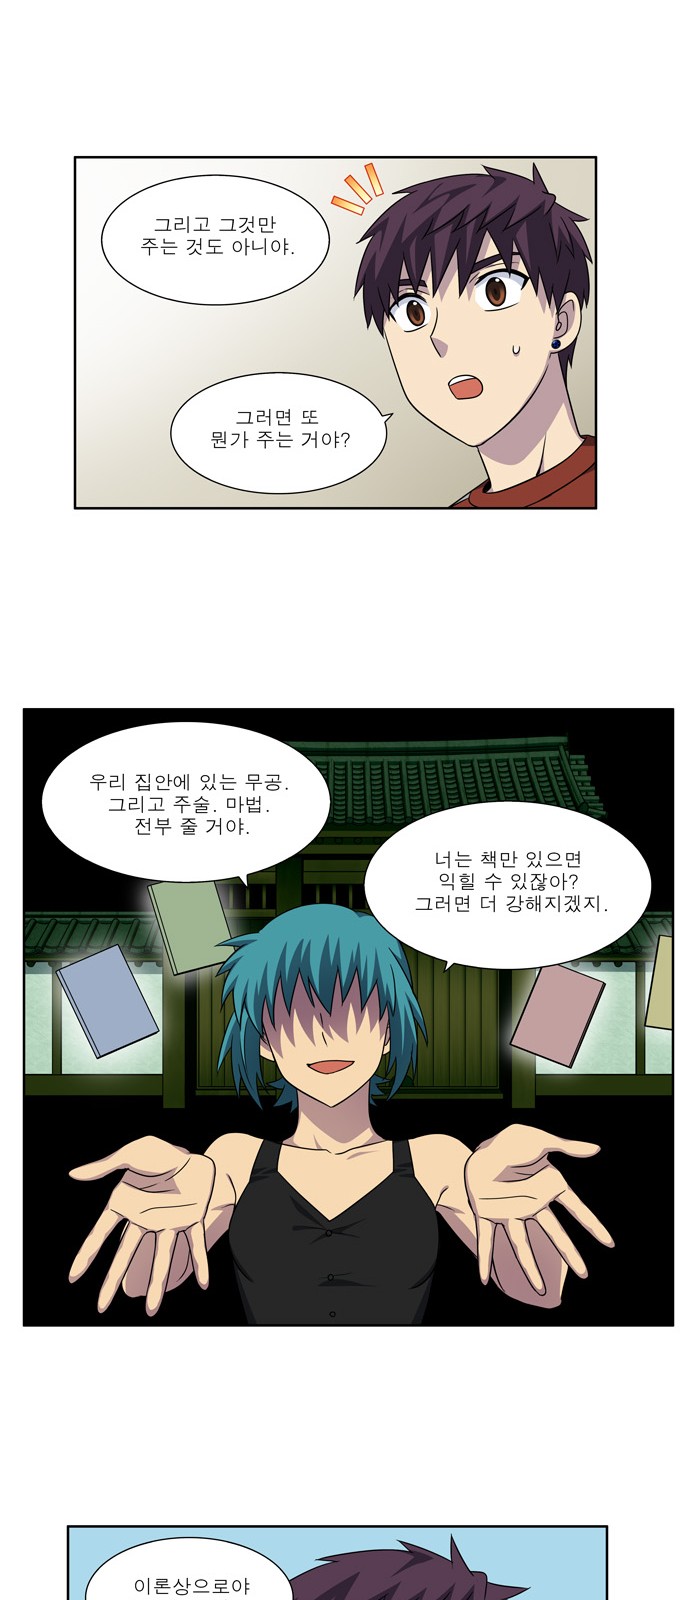 The Gamer - Chapter 276 - Page 4